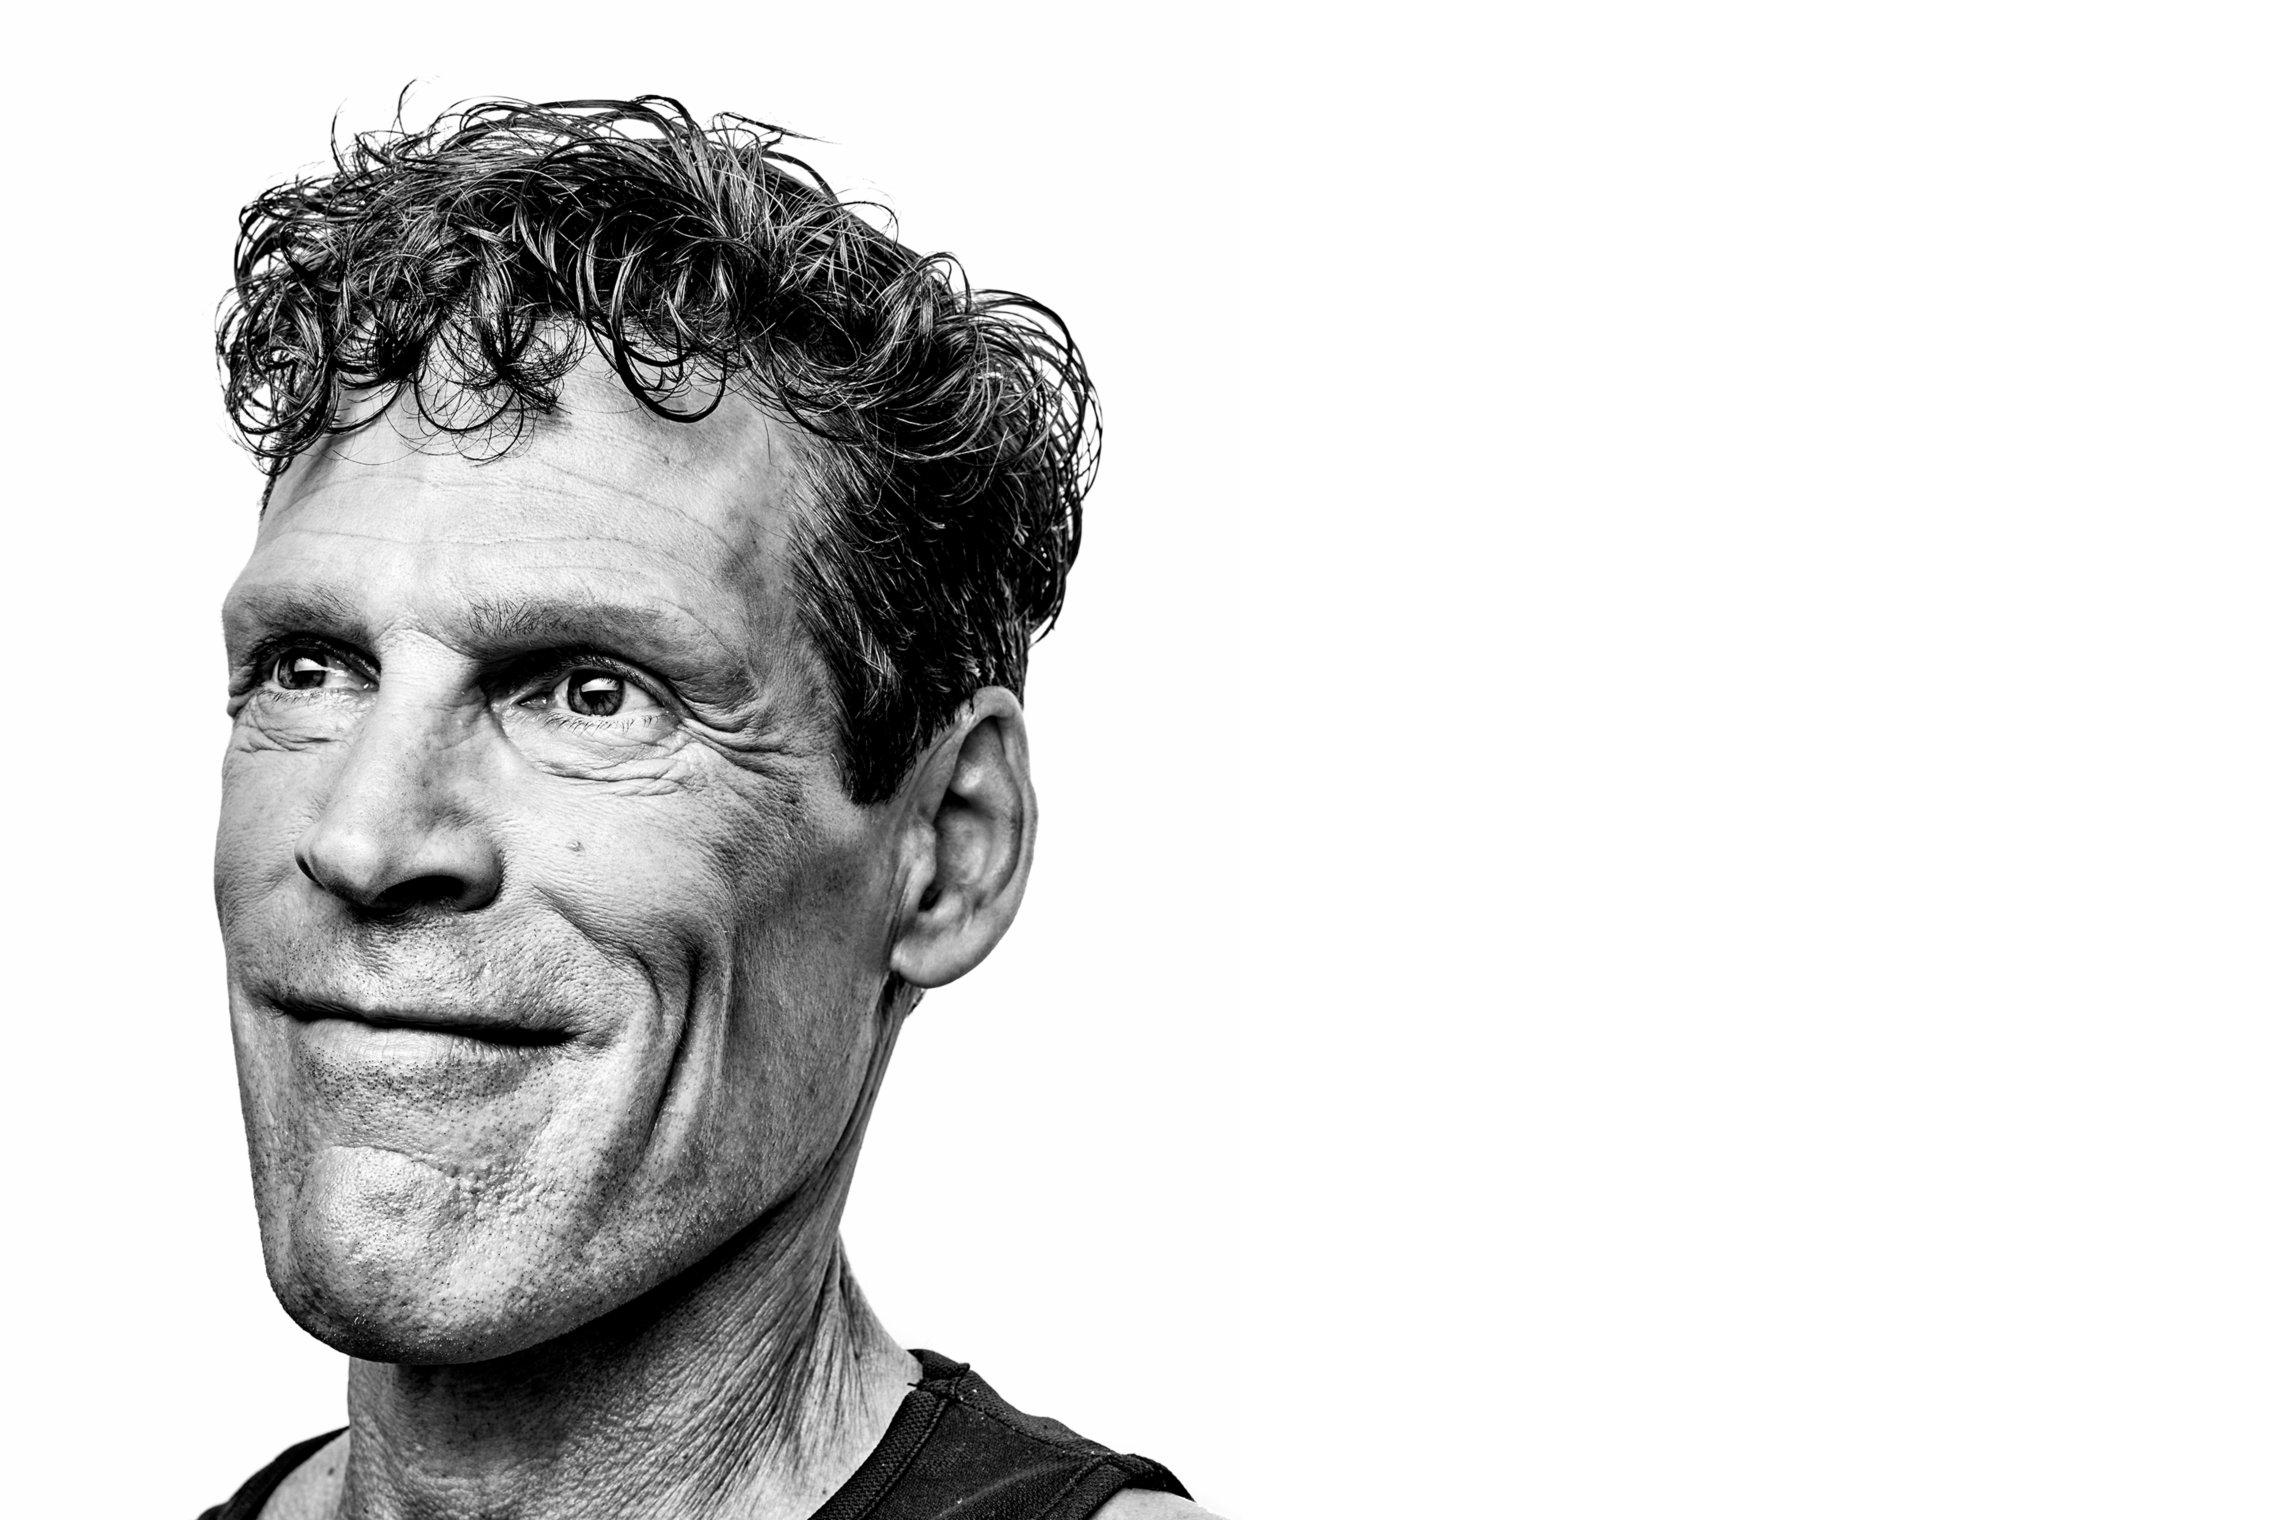 Ultra-runner, Dean Karnazes, is portrayed in a black and white portrait.